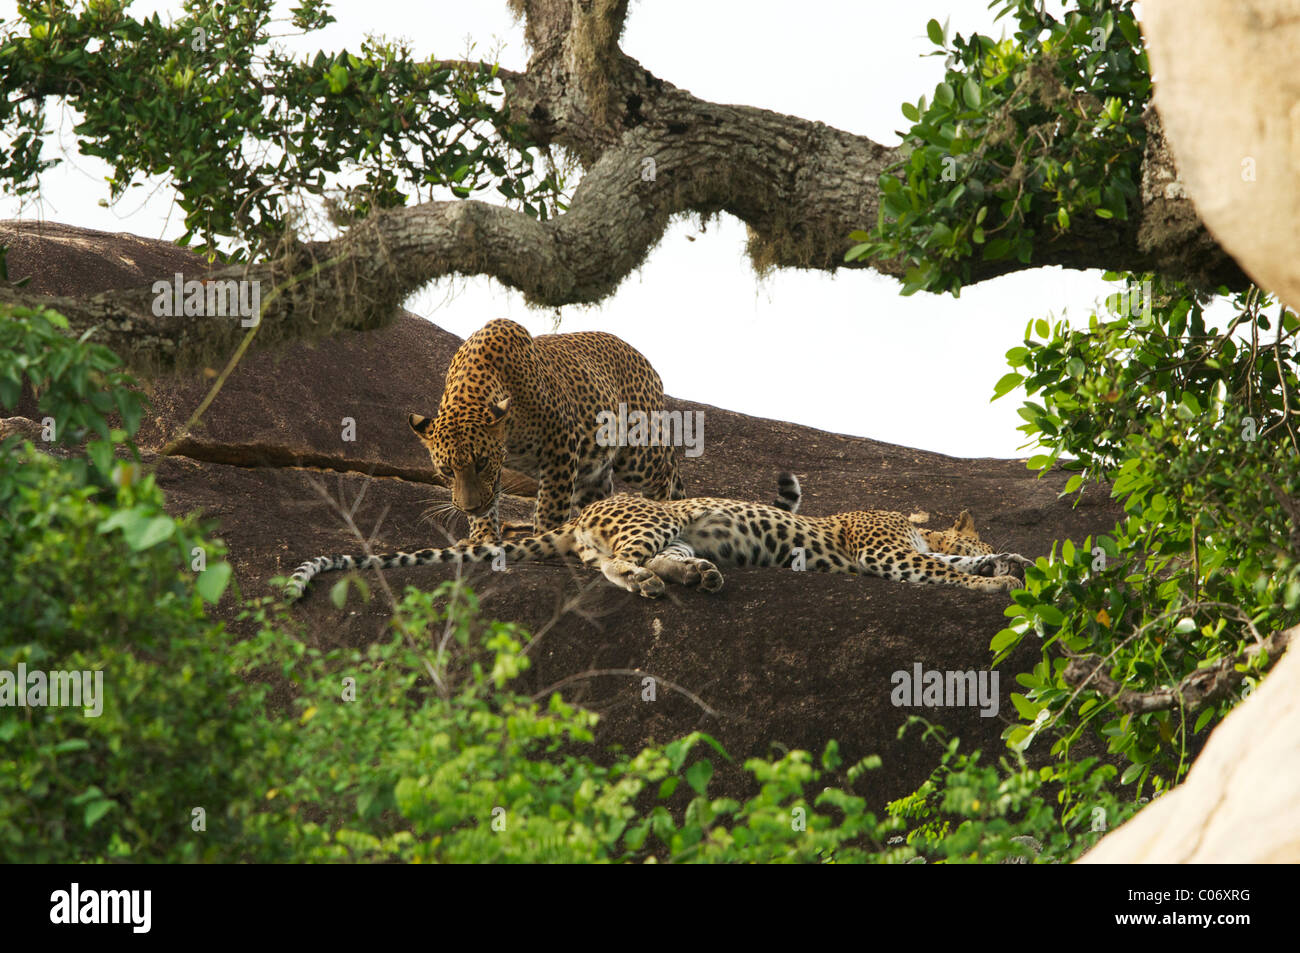 Brown leopard on top of grey rock photo – Free Animal Image on